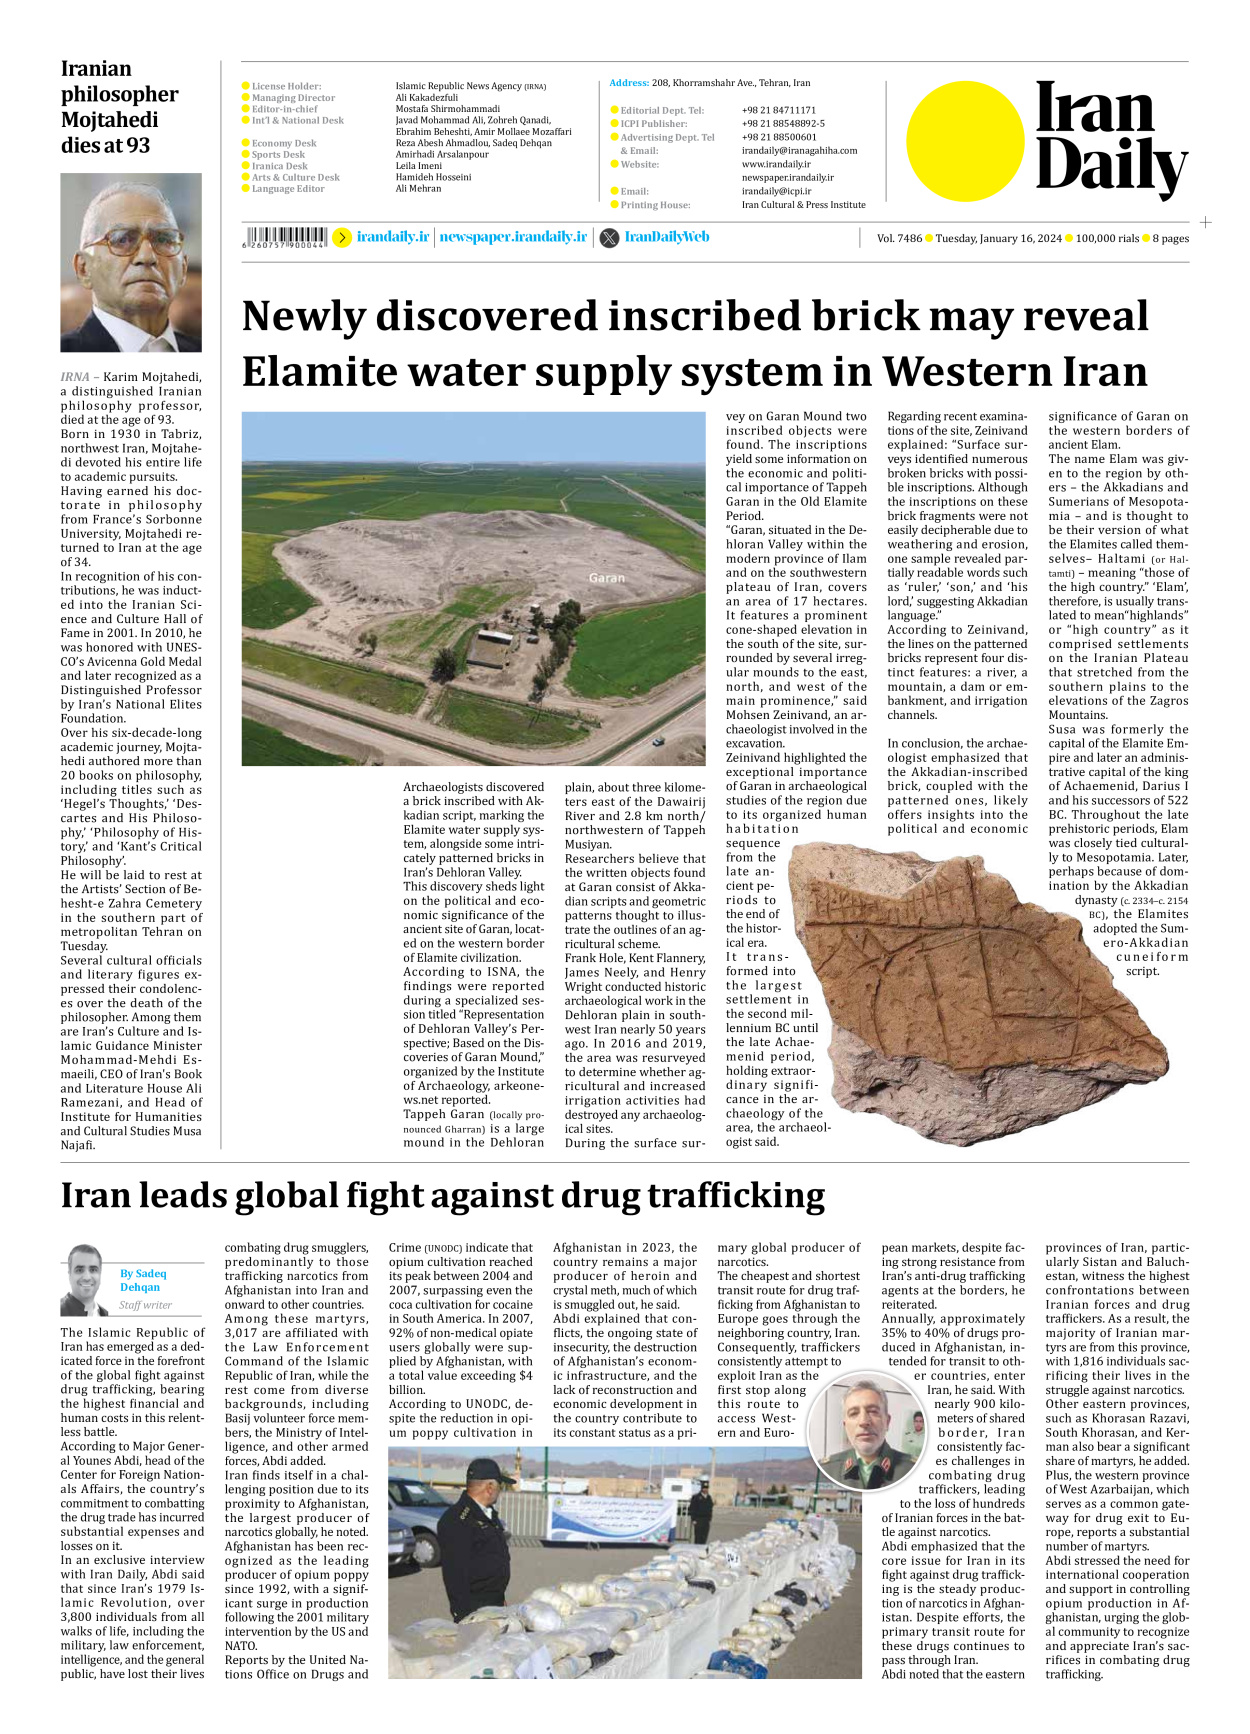 Iran Daily - Number Seven Thousand Four Hundred and Eighty Six - 16 January 2024 - Page 8